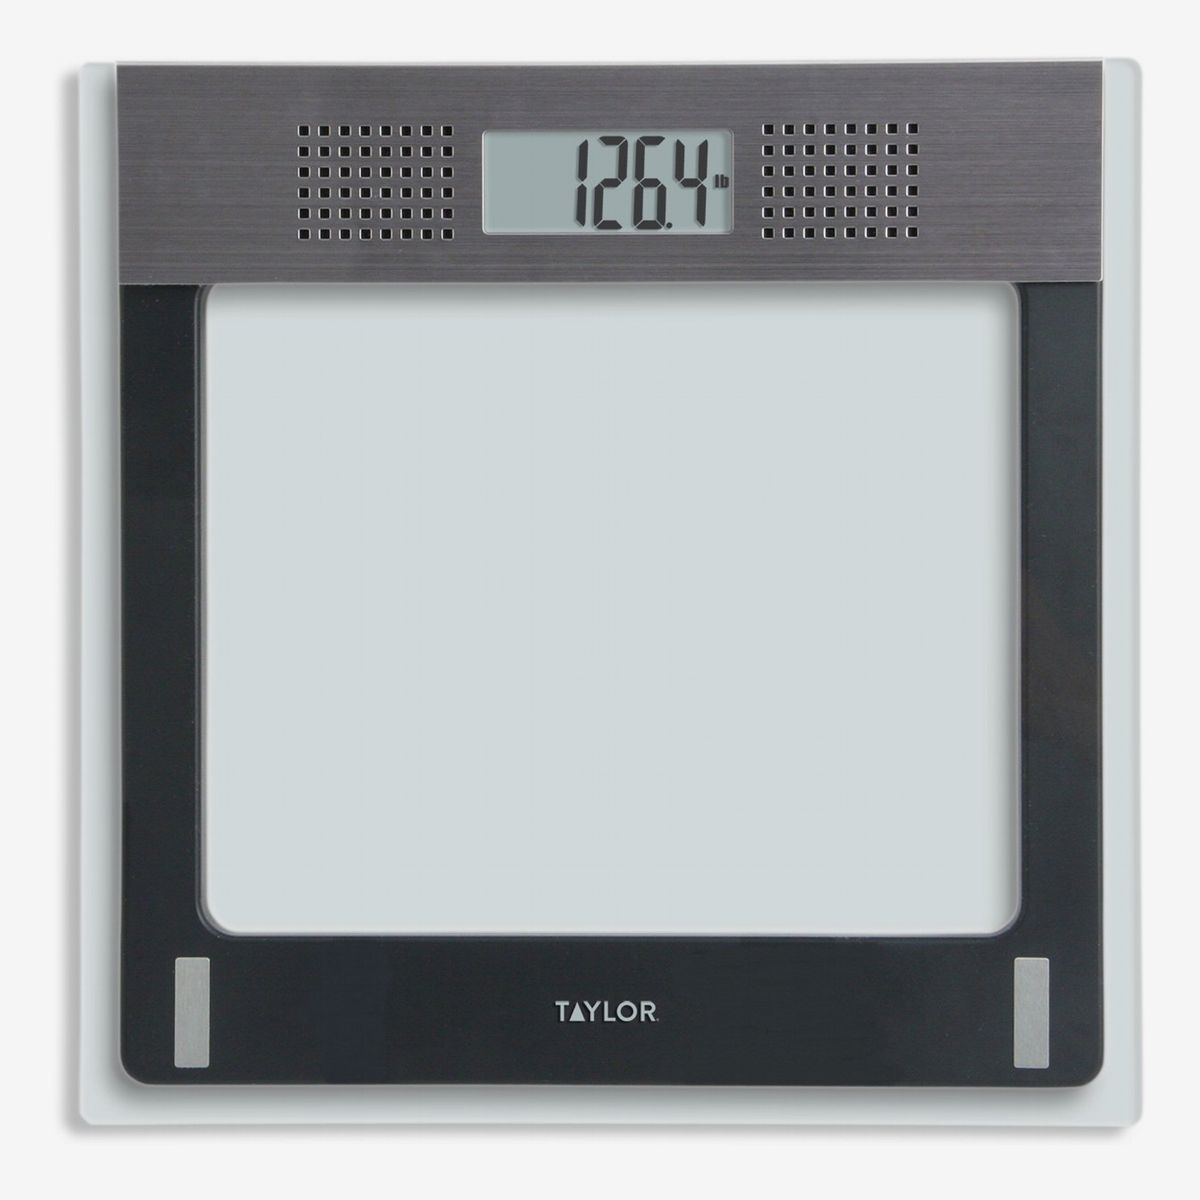 ELECTRONIC DIGITAL LCD GLASS WEIGHING BODY WEIGHT SCALES SCALE BATHROOM BLACK 